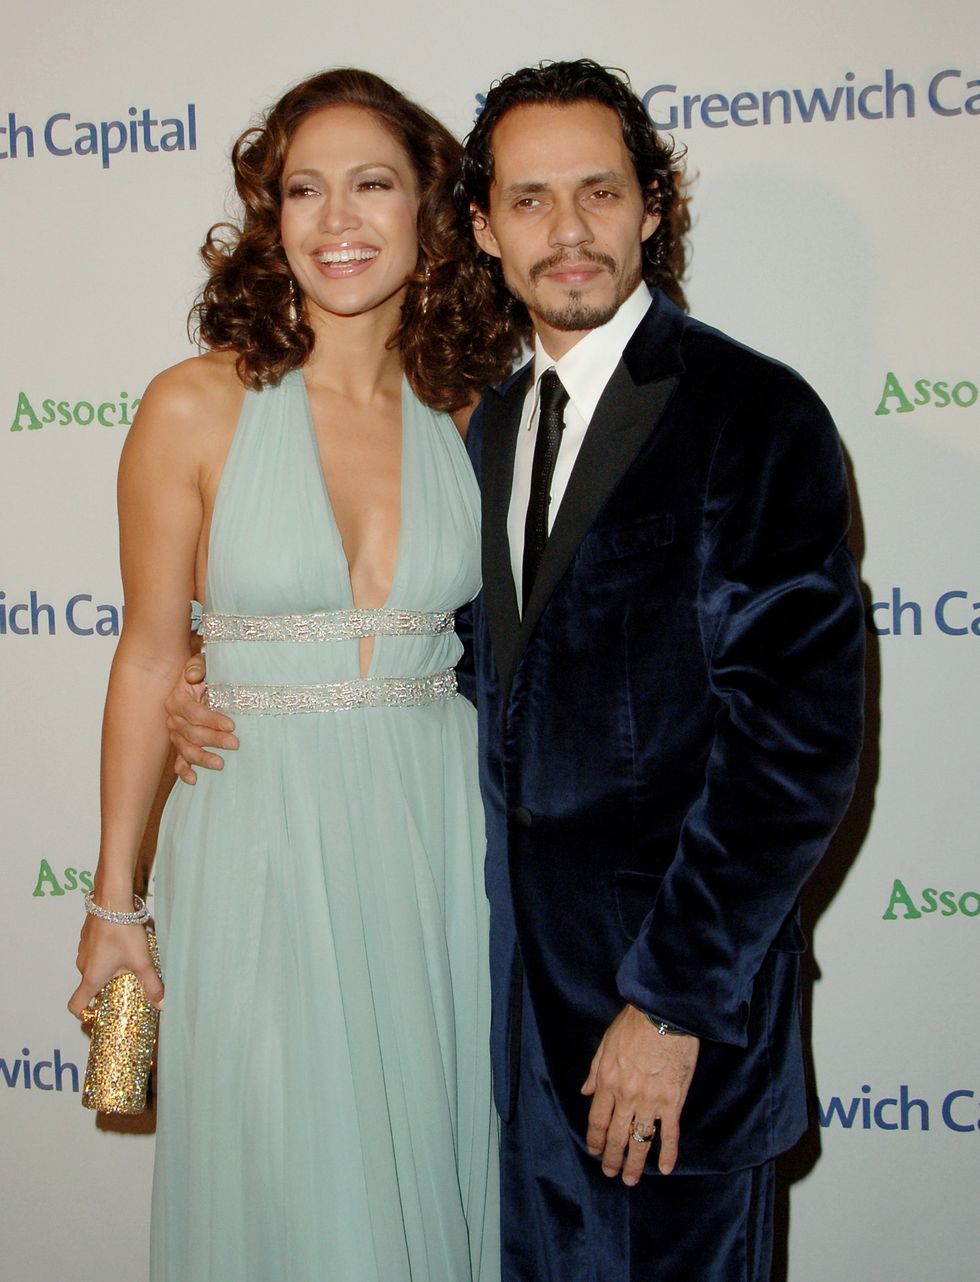 jennifer lopez and marc anthony during singers and songs celebrate tony bennett's 80th to benefit paul newman's hole in the wall camps   arrivals at kodak theater in hollywood, california, united states photo by jon kopalofffilmmagic